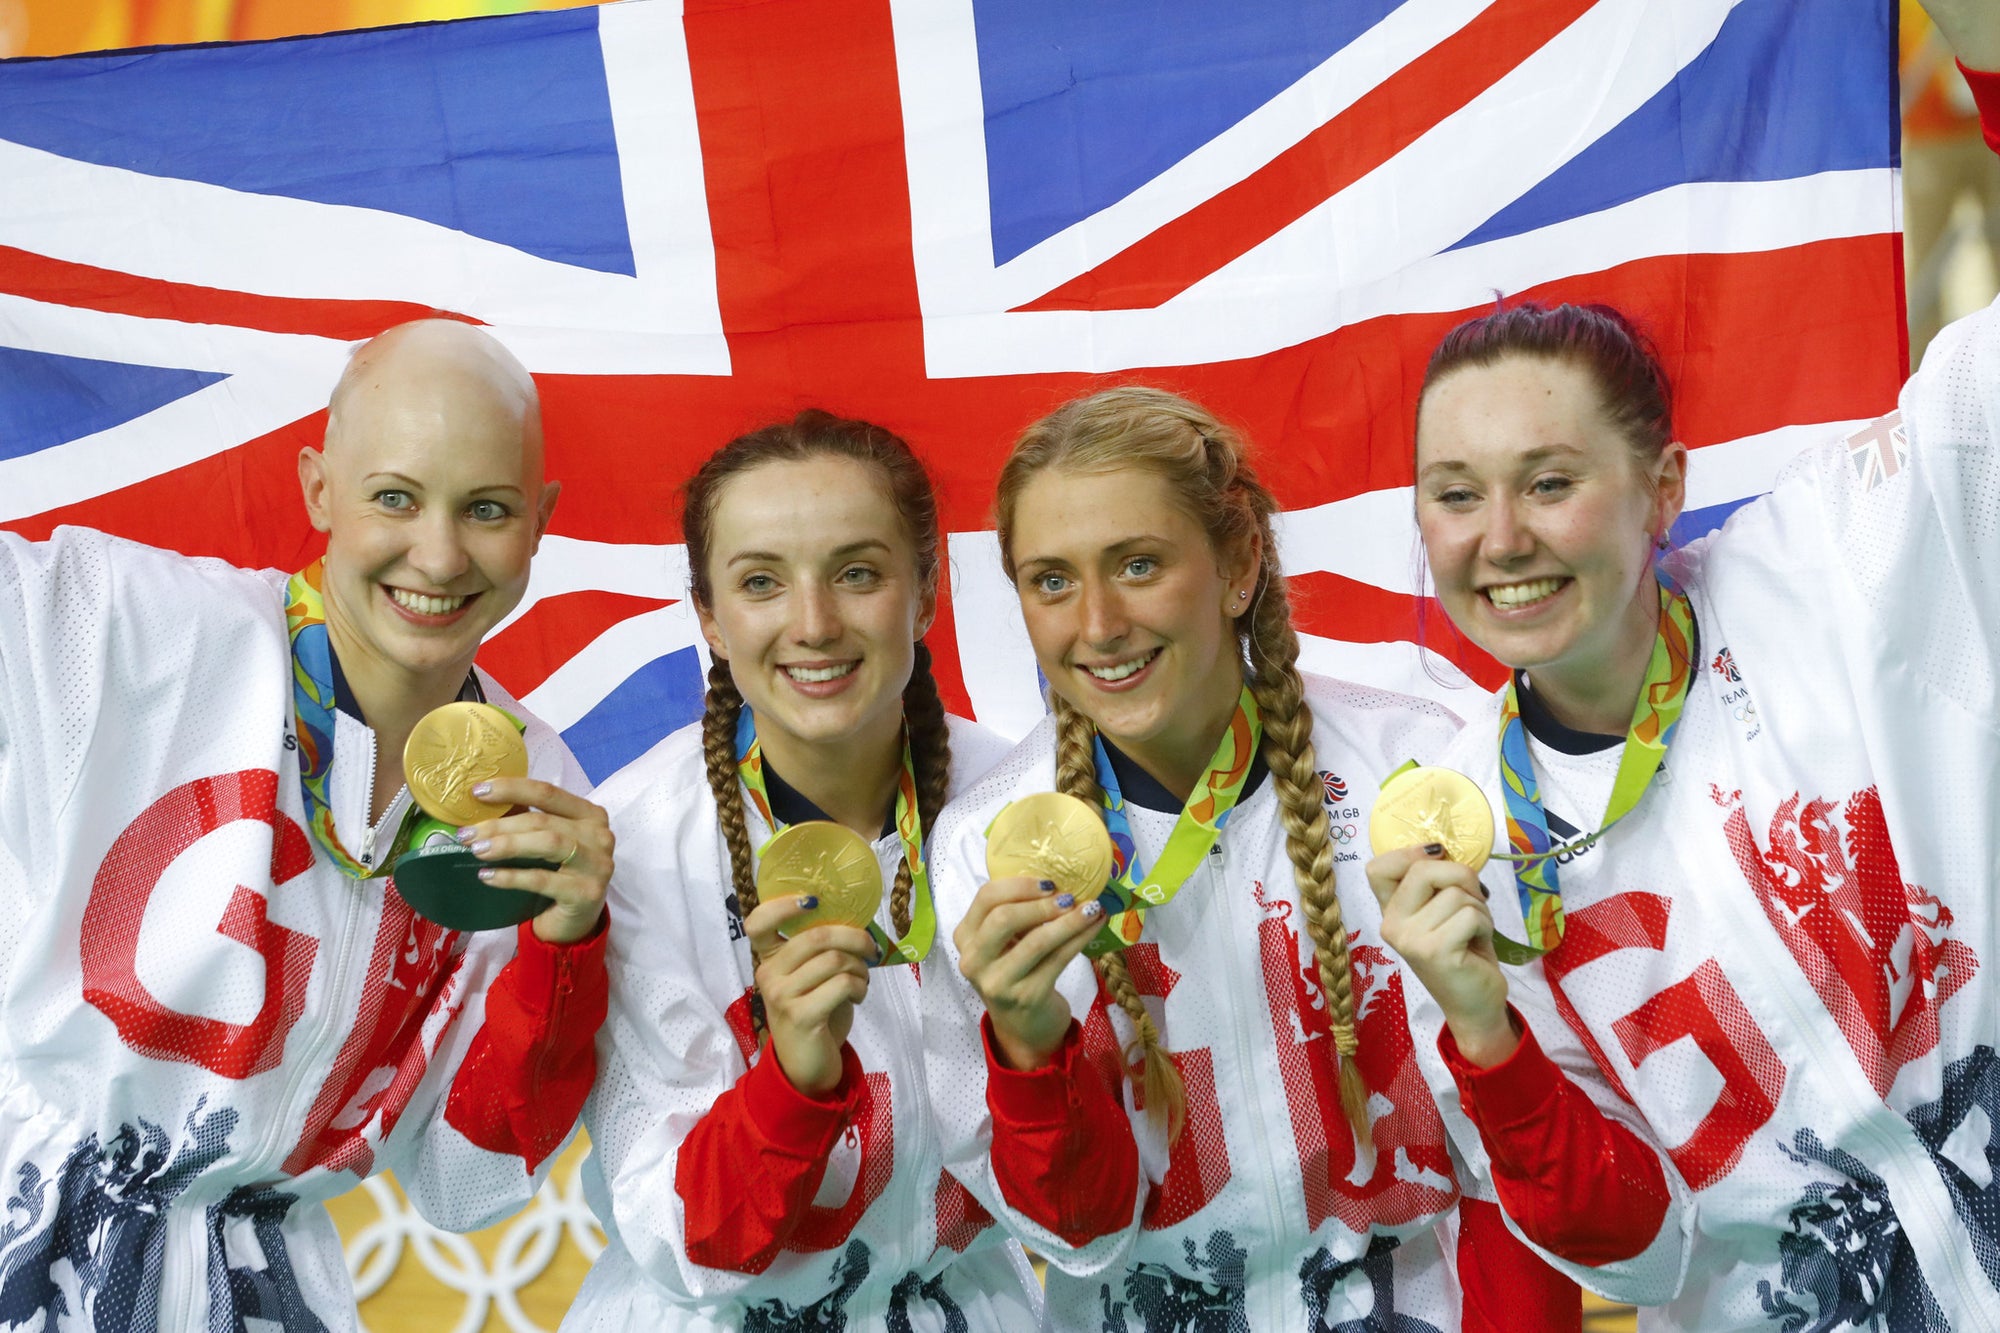 Polemic: On the Significance of Team GB's Olympic Success